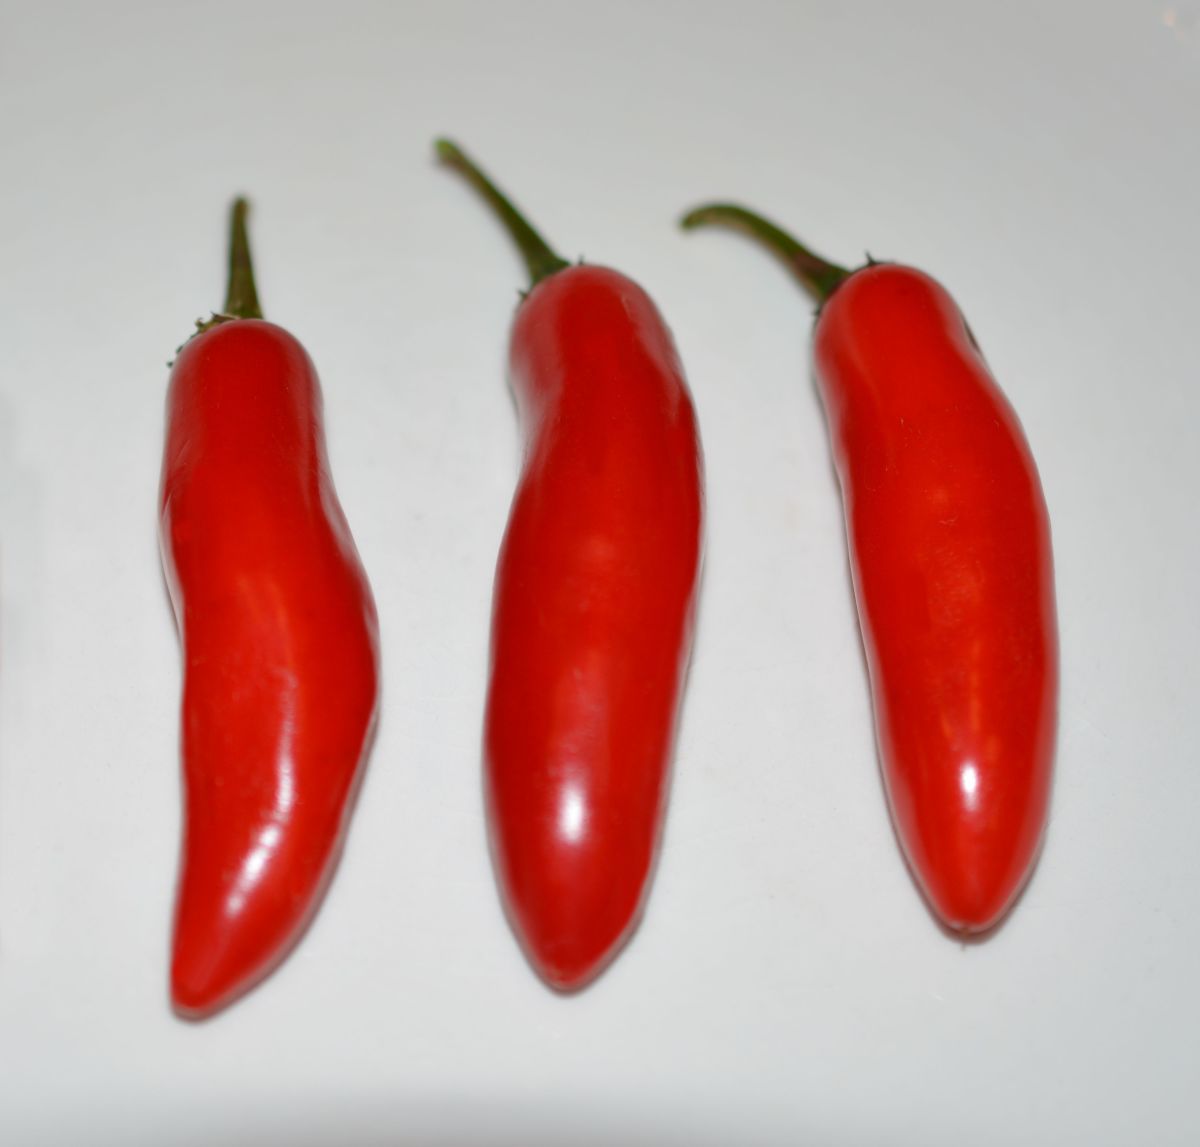 I grew these red hot chili peppers in my garden a few years ago, and ended up drying and crushing them for use in keeping rabbits off of my flowers.